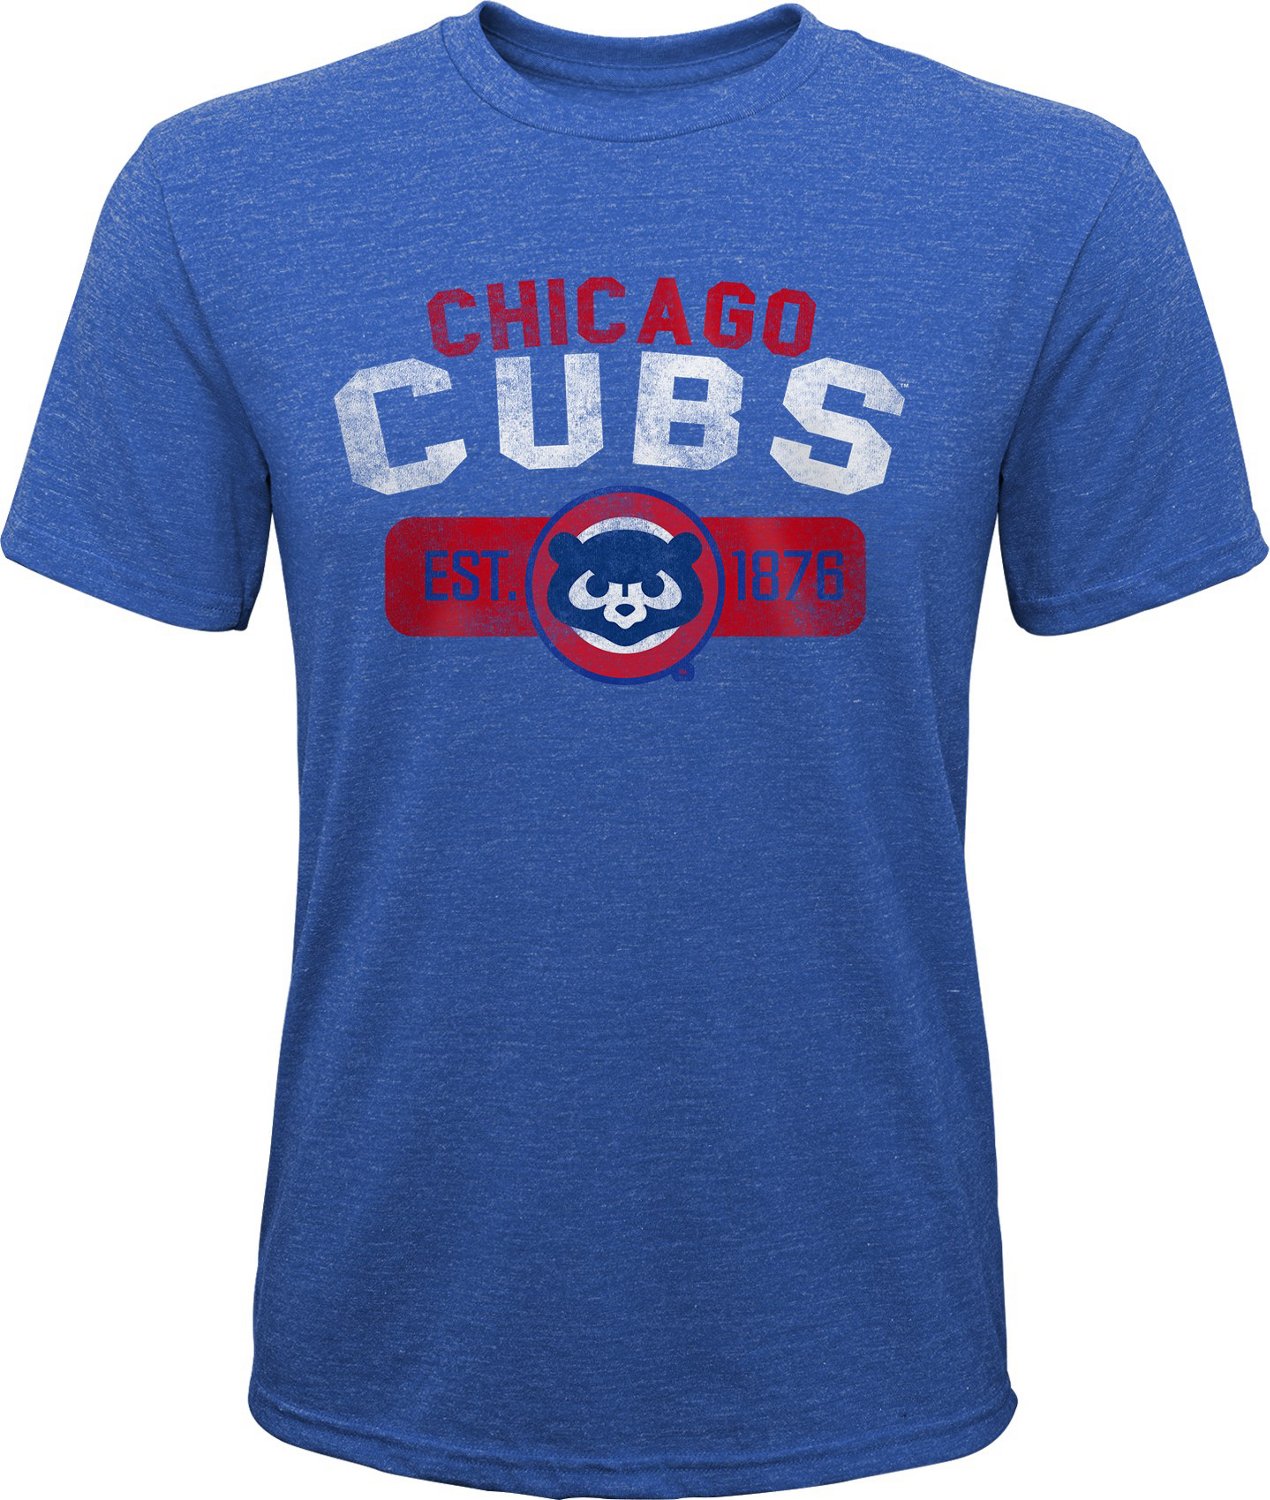 Outerstuff Boys' Chicago Cubs Cooperstown Nostalgia Graphic T-shirt